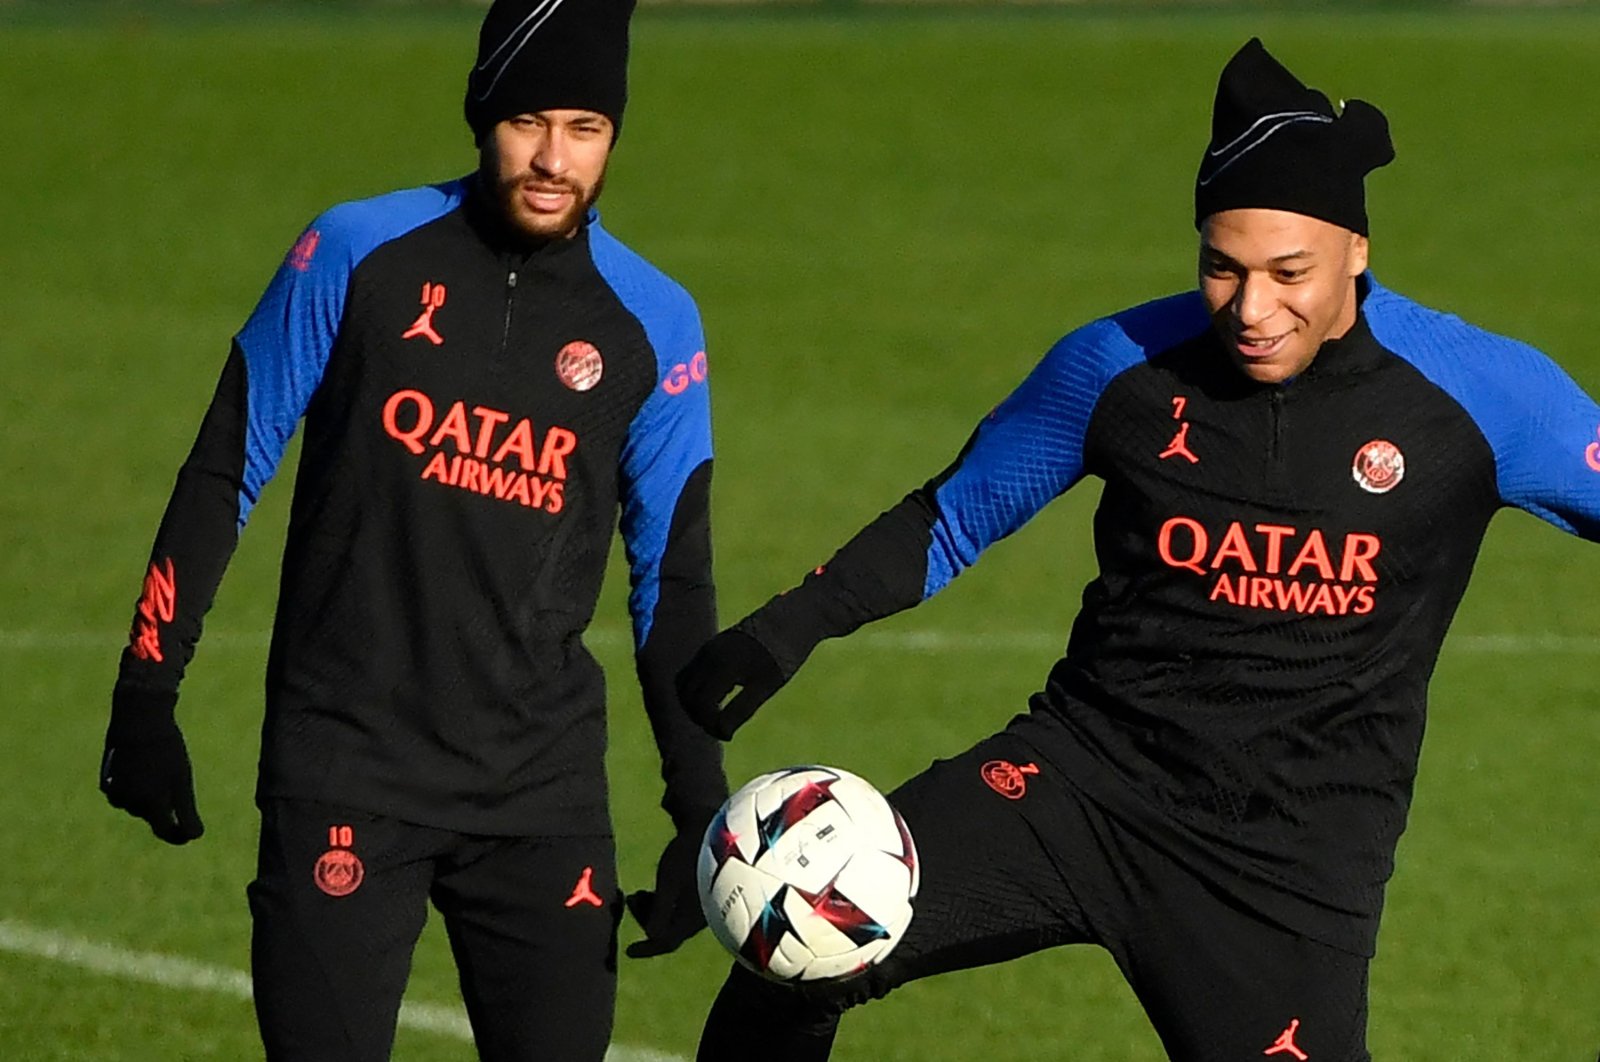 Brazilian forward Neymar and French forward Kylian Mbappe at a training session at the club&#039;s "Camp des Loges" training ground in Saint-Germain-en-Laye, in Paris, France, Dec. 27, 2022. (AFP Photo)